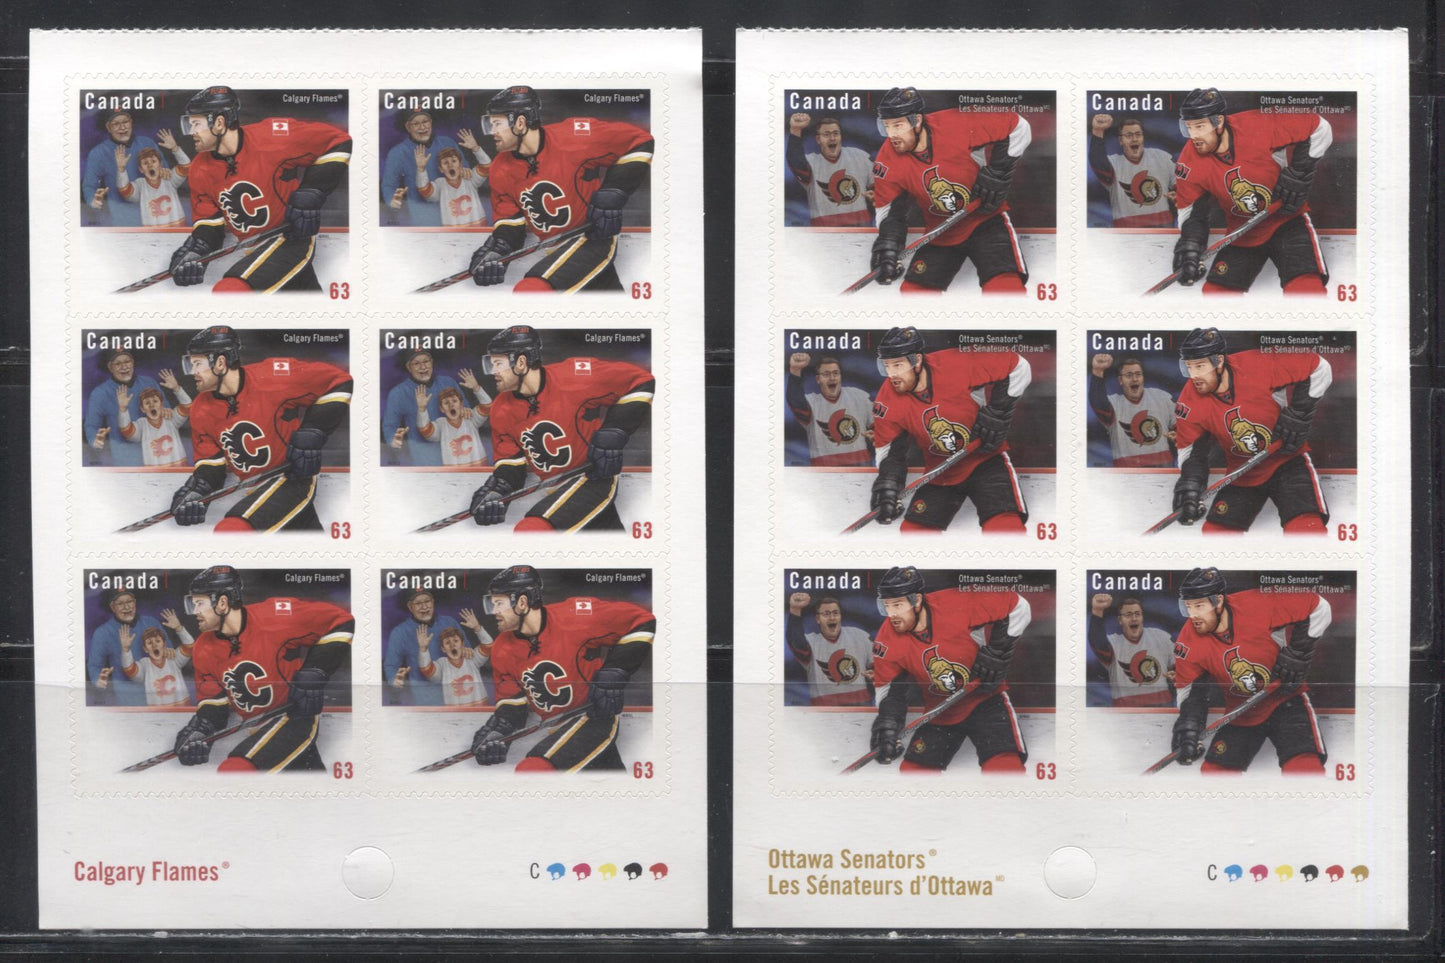 Lot 107 Canada #2673-2674 2013 Canadian NHL Team Jerseys Issue, VFNH Booklet Panes of 6 on LF TRC Paper